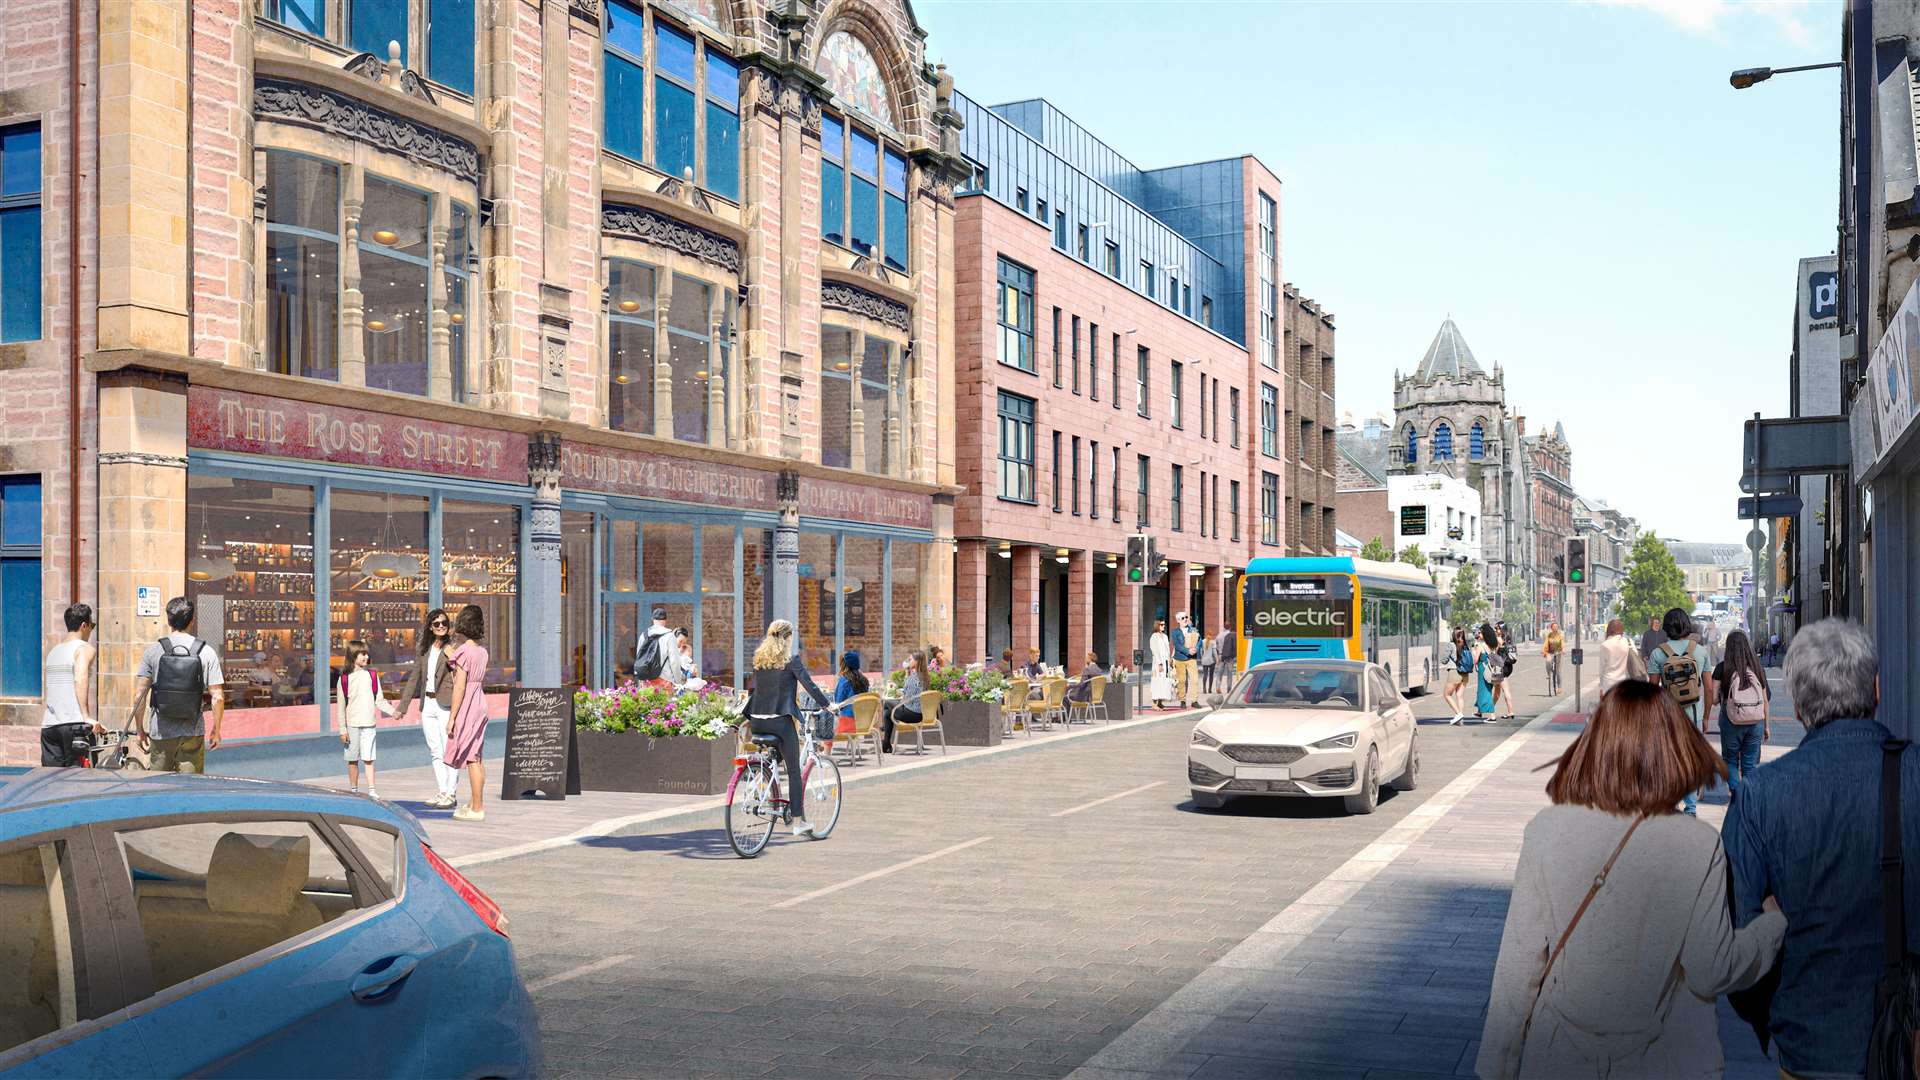 The full Highland Council has now given the go-ahead for progressing plans on changing Academy Street.